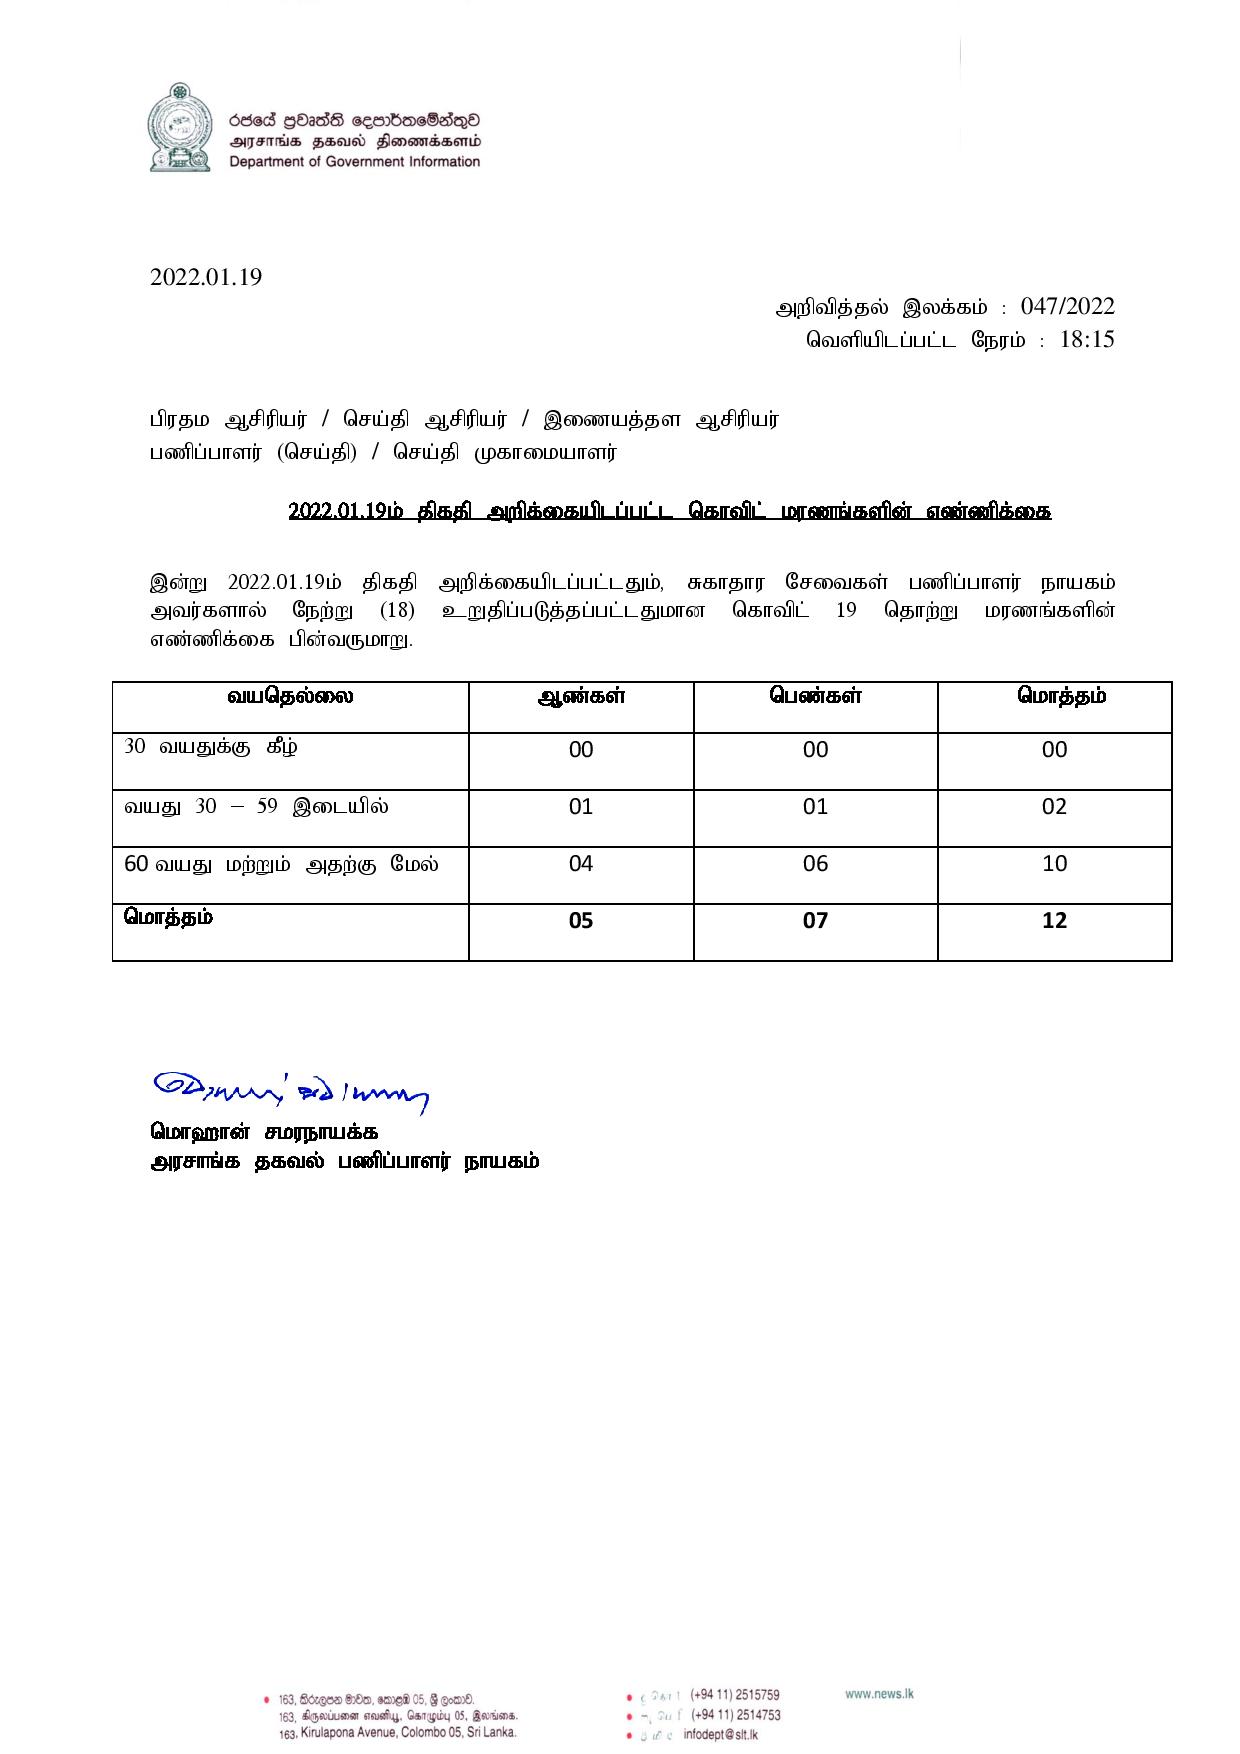 Press Release 47 Tamil page 001